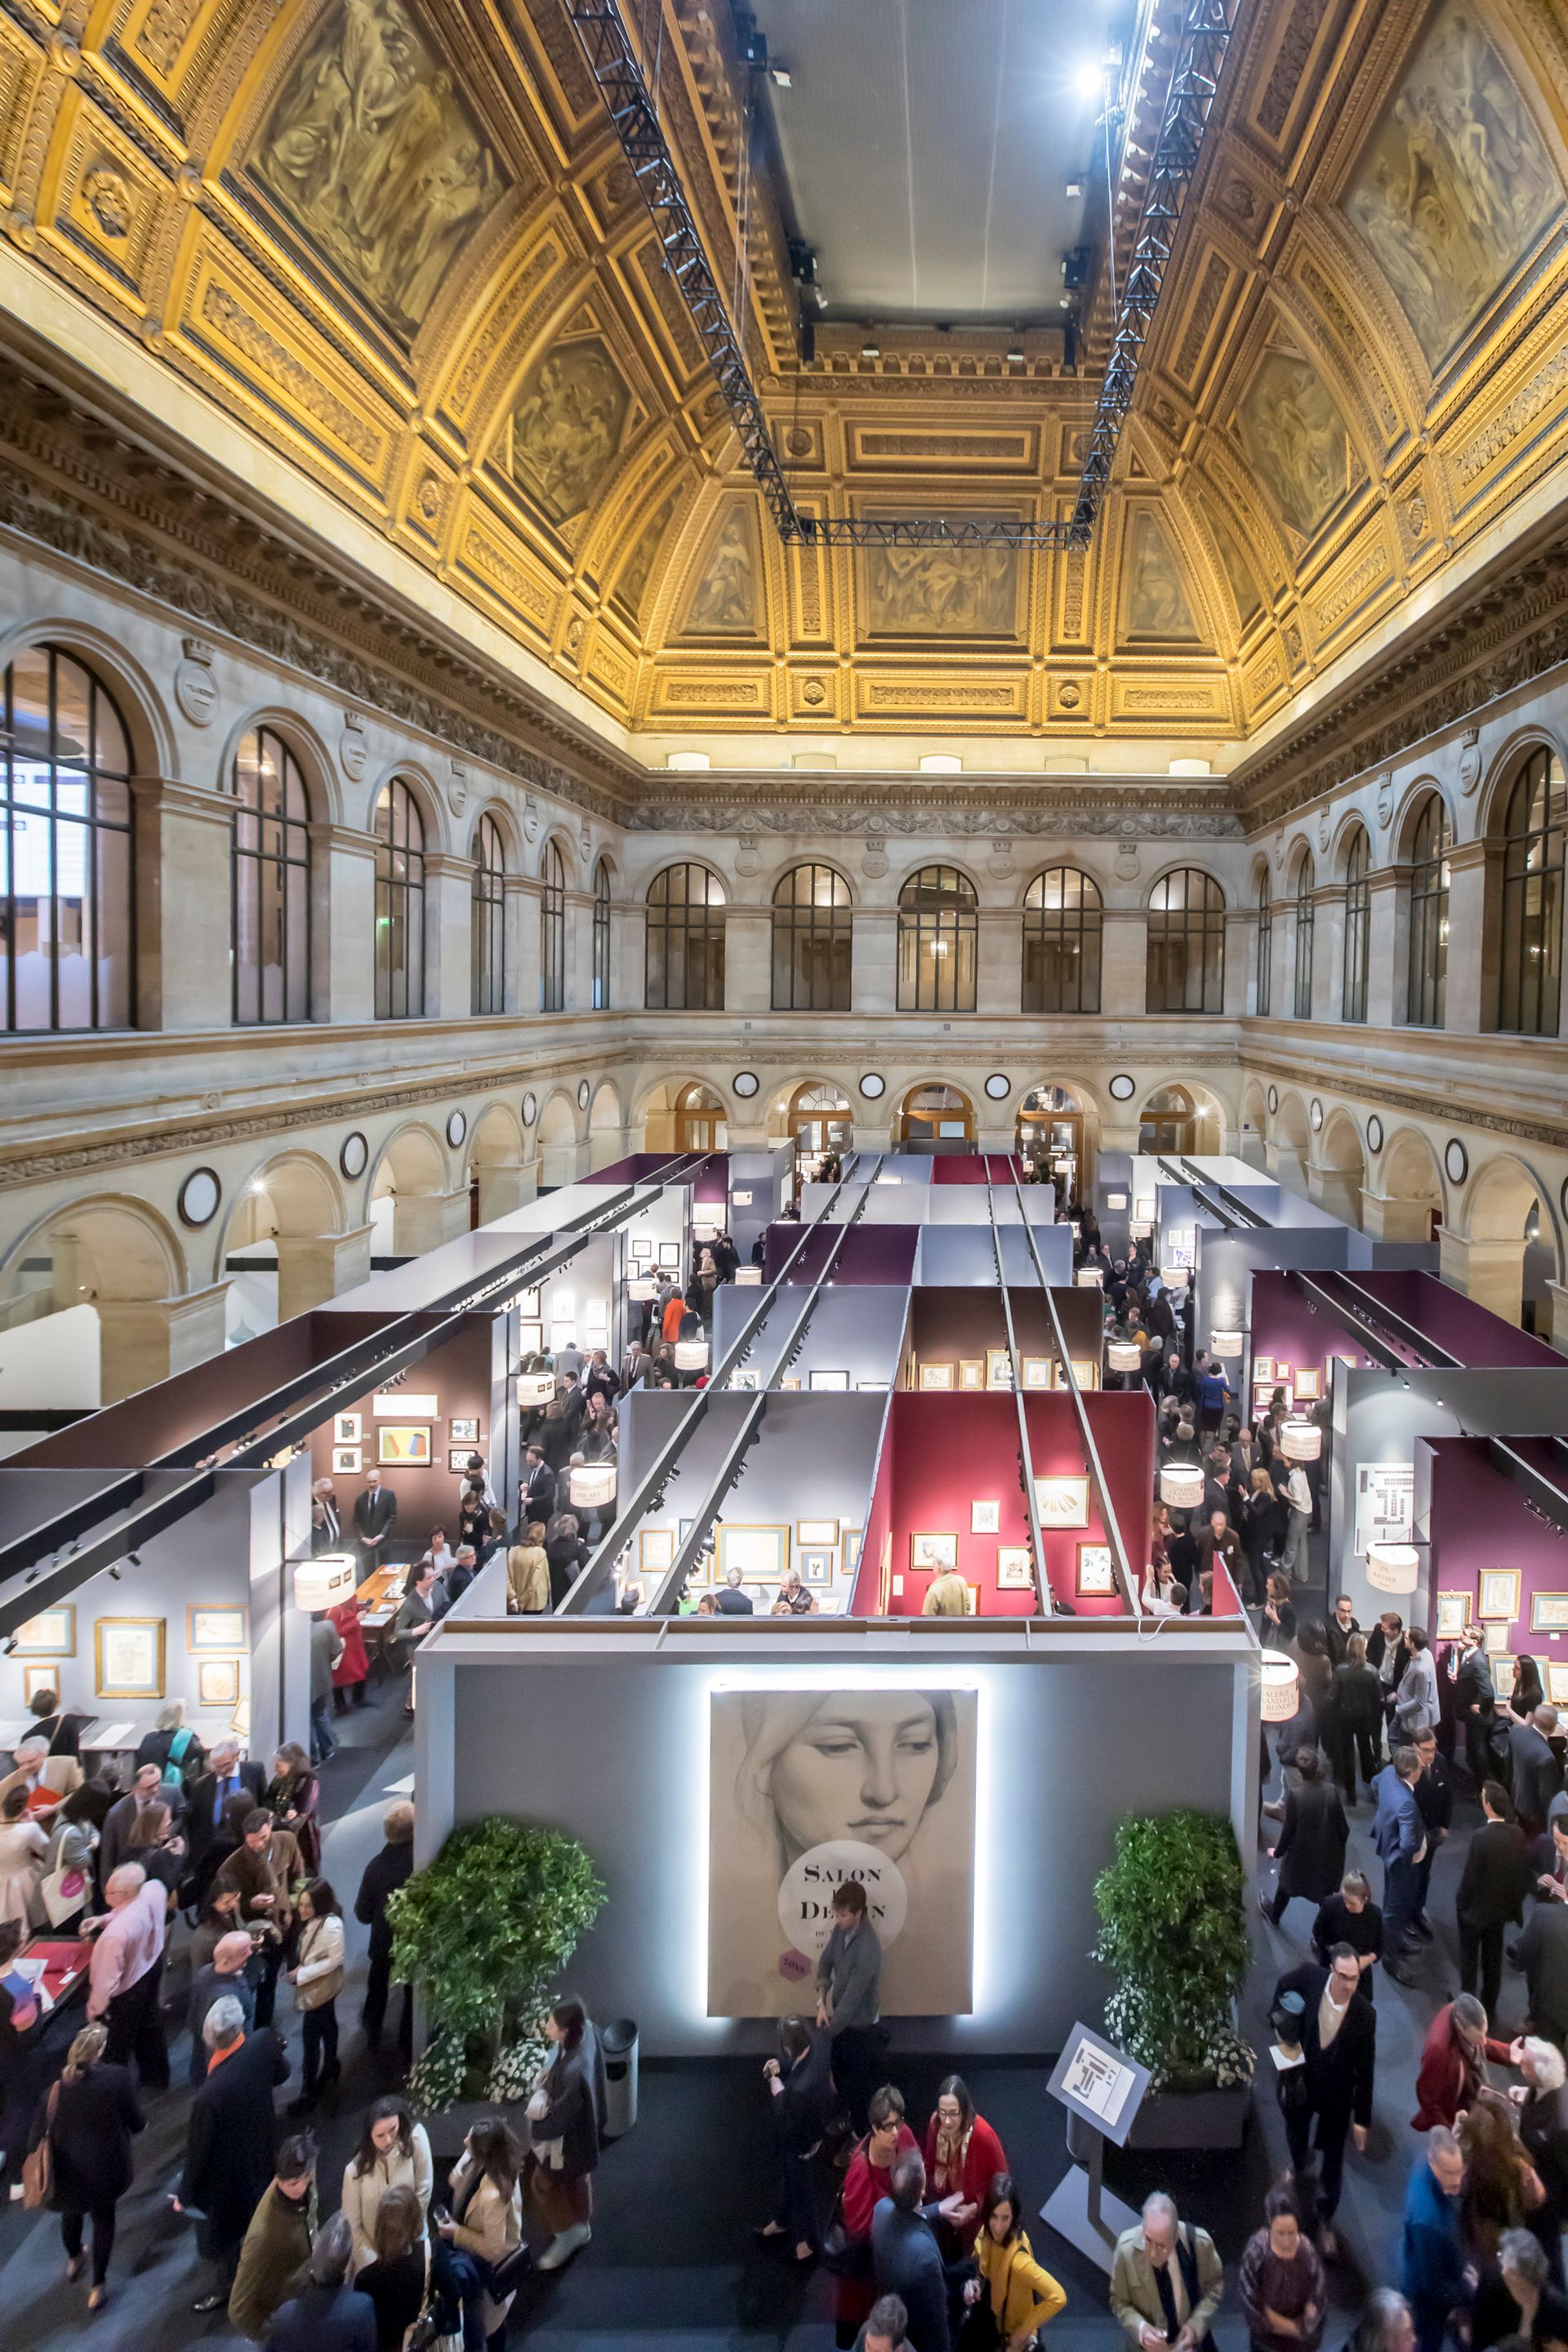 Exhibitors at Paris's drawings fair seemed largely unconcerned by Brexit woes Salon du Dessin